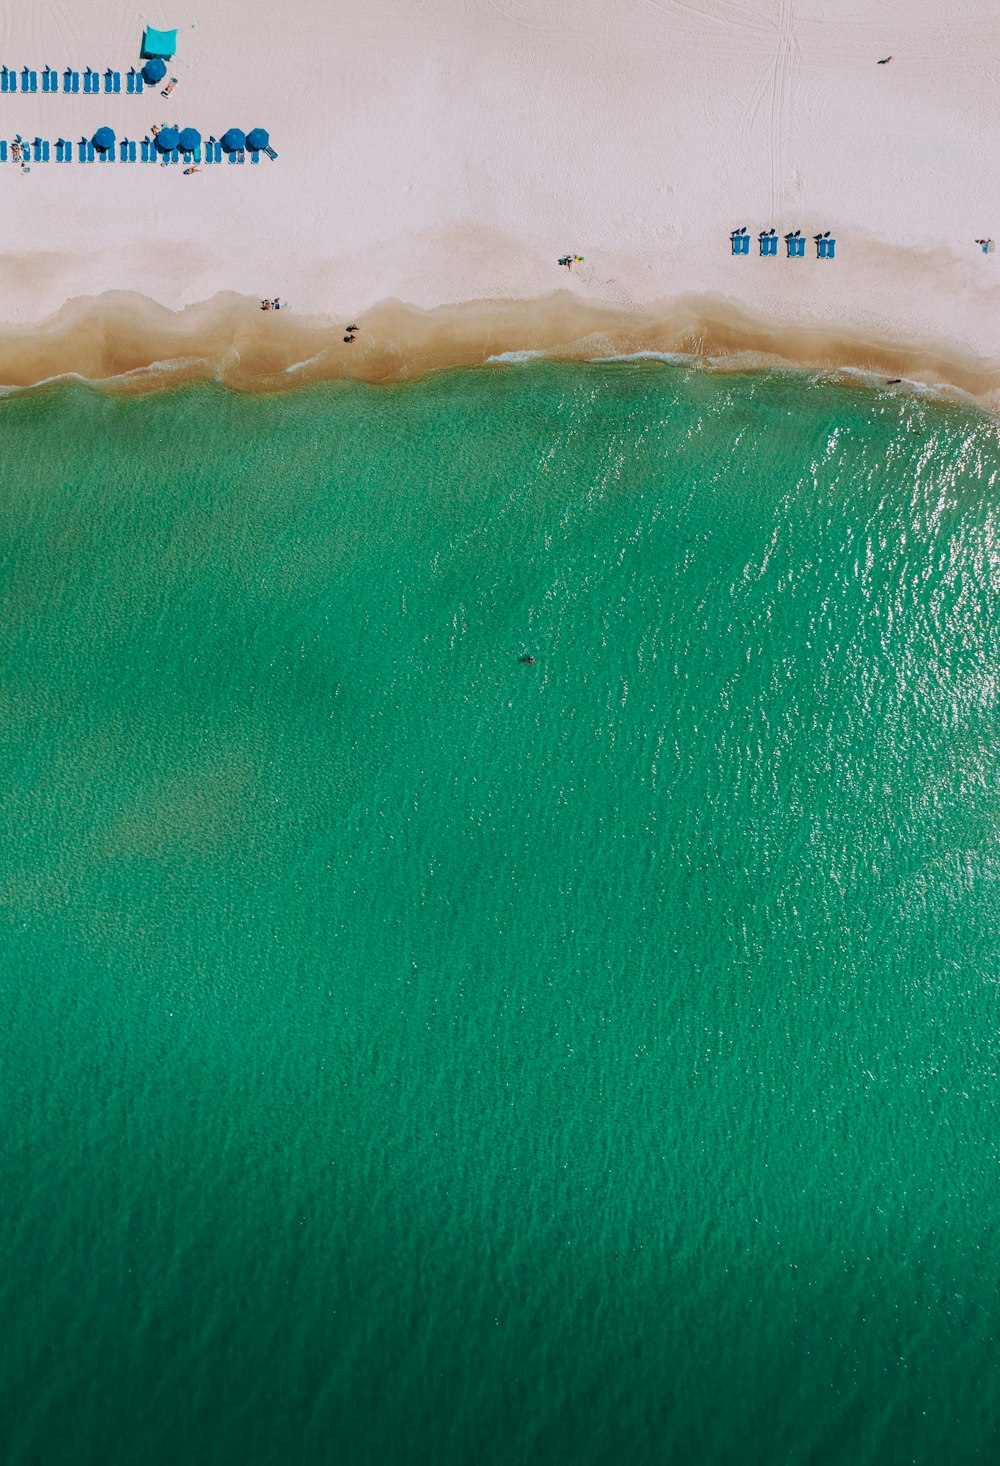 an aerial view of a beach with people on it